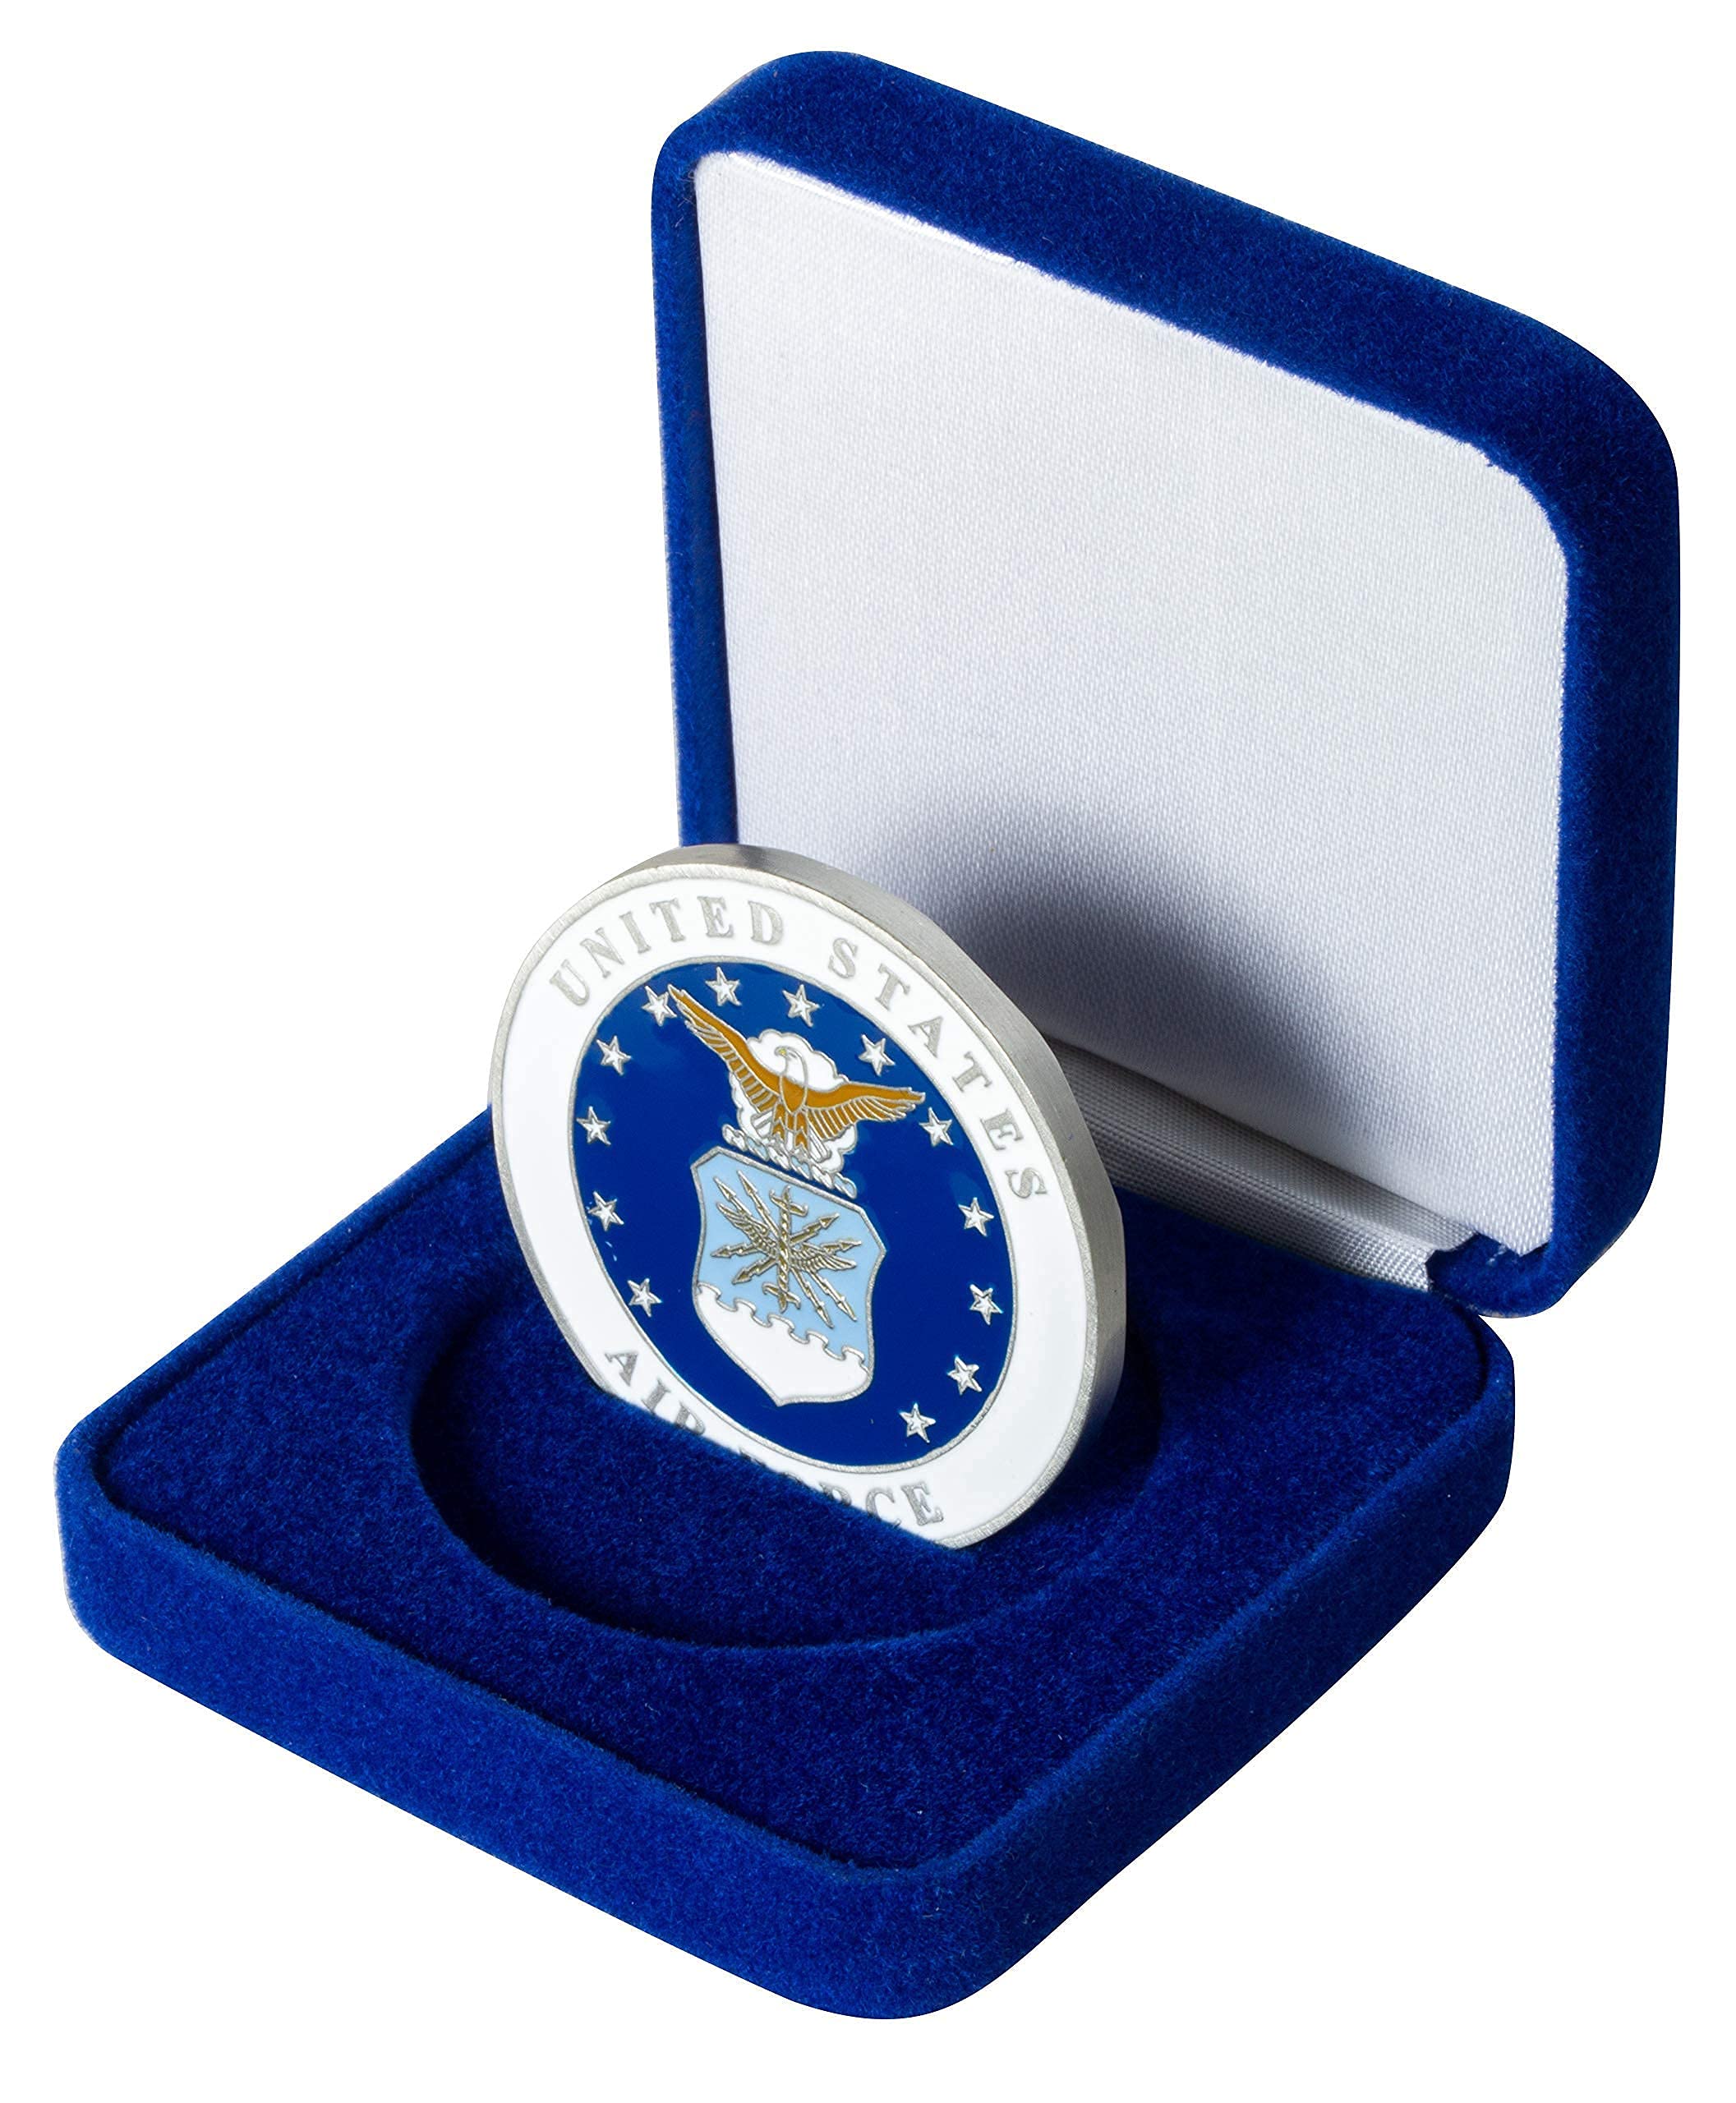 Never Forget 9/11 United We Stand Challenge Coin and Blue Velvet Display Box